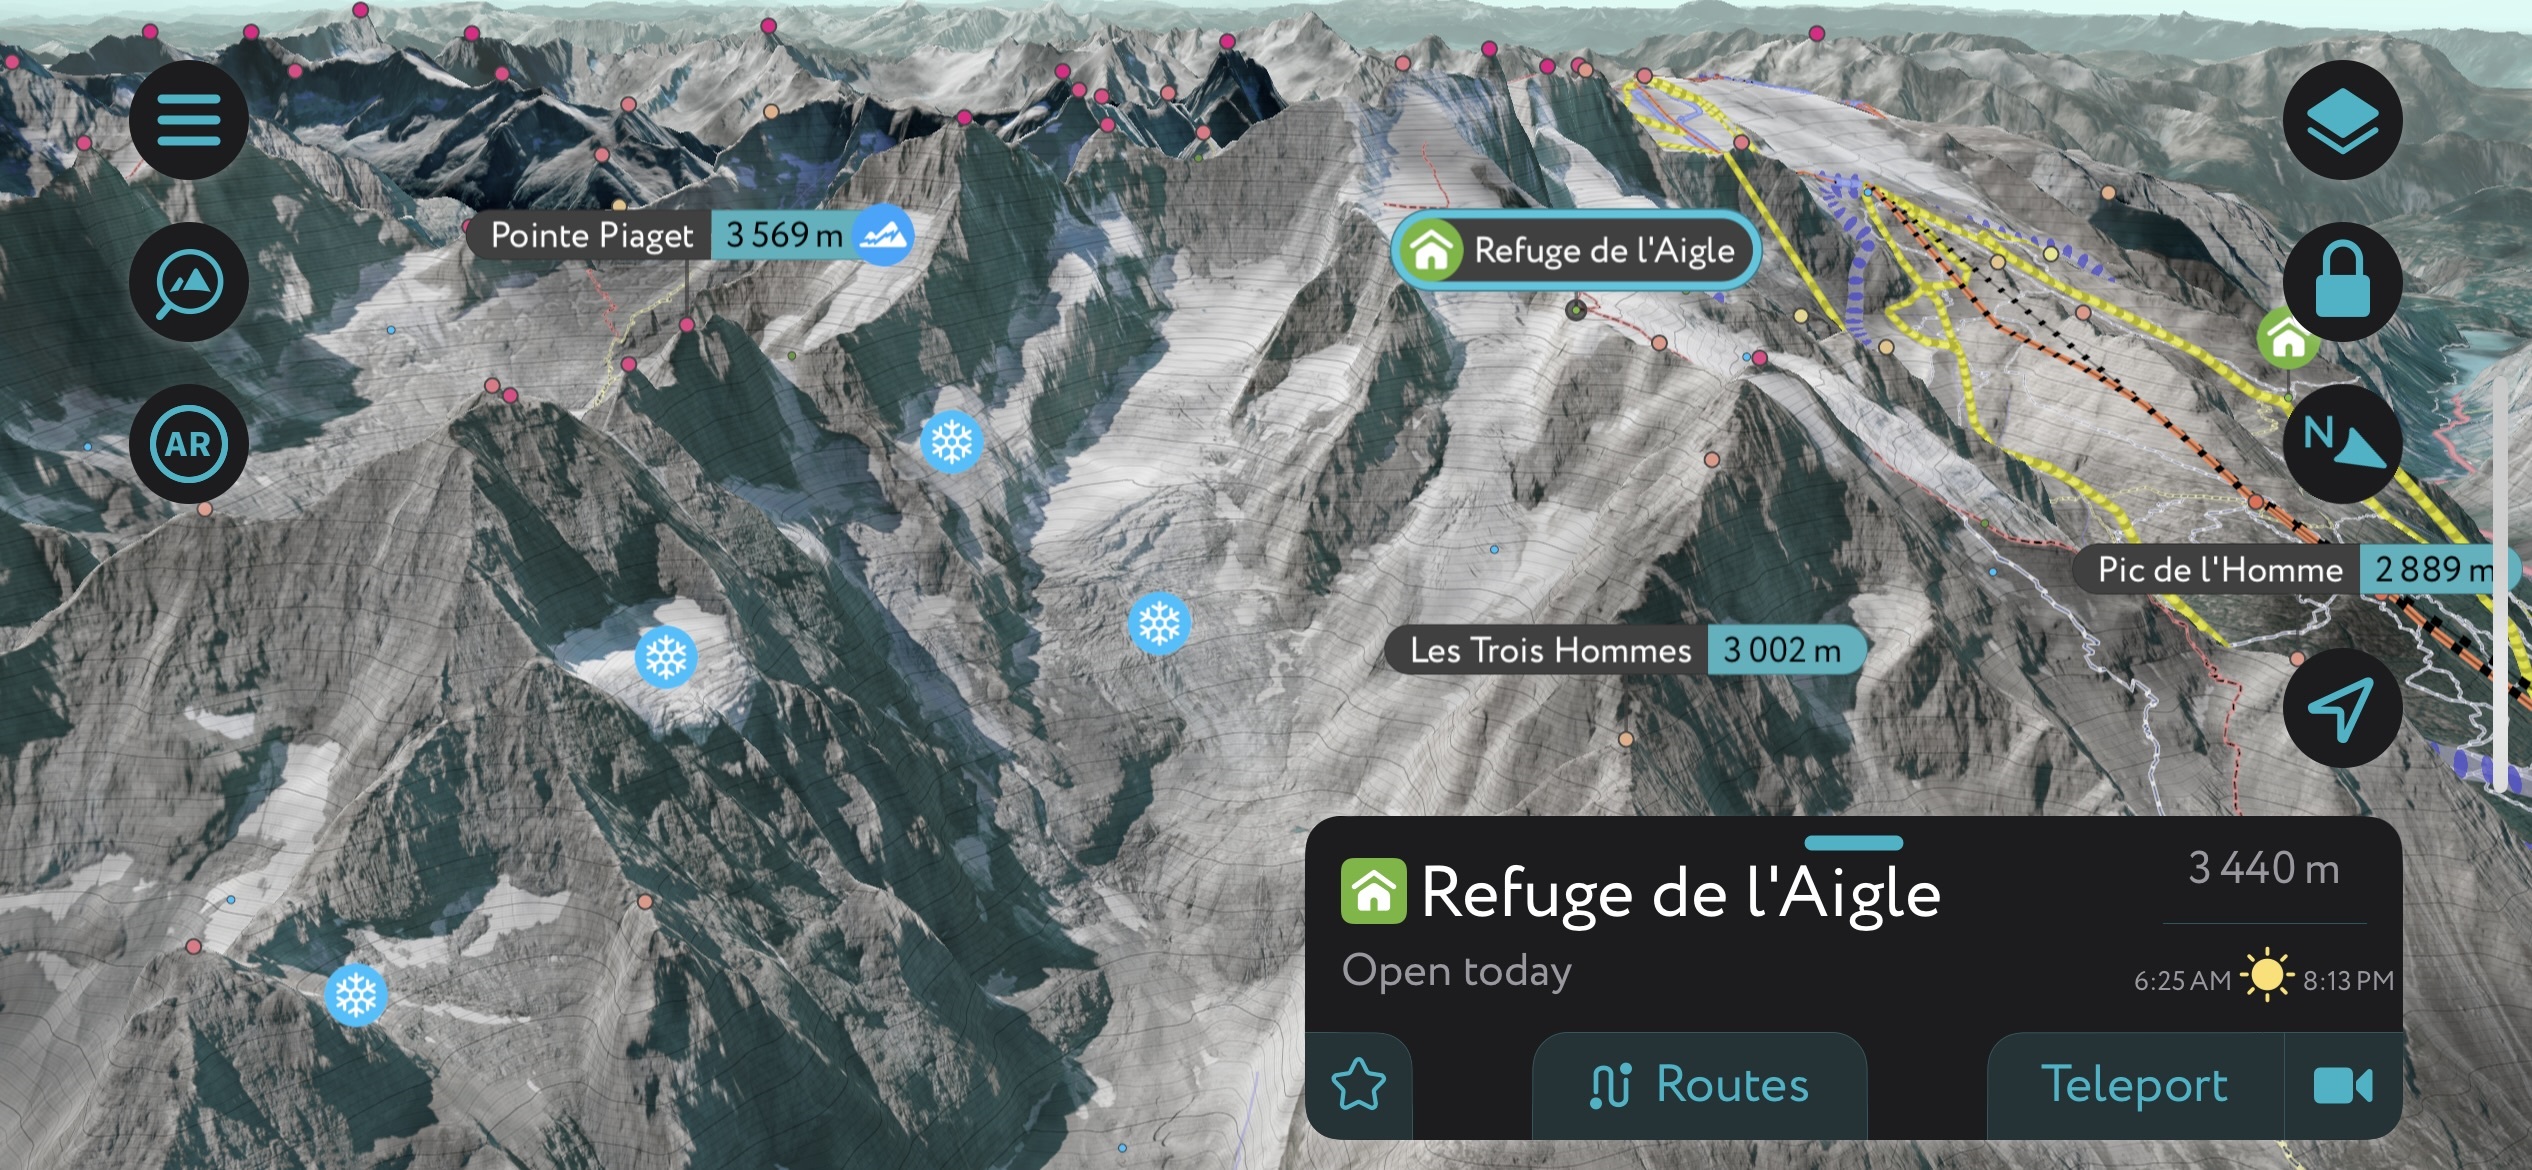 The PeakVisor mobile app is the perfect tool to take your ski touring to the next level.